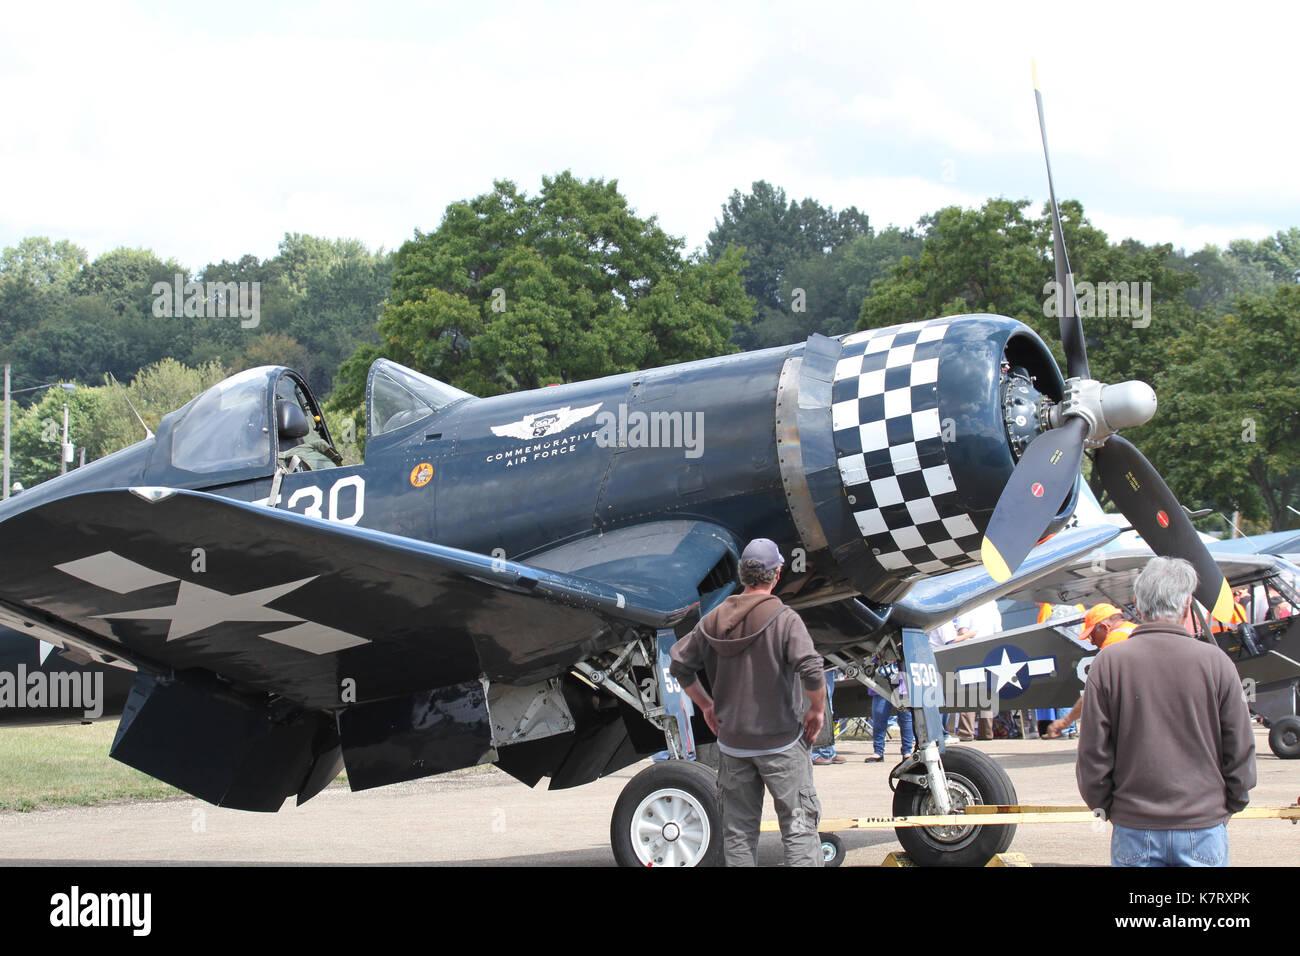 AKRON, USA - SEPT 9: Goodyear FG-1D Corsair at Props and Pistons Airshow taking place at the Akron Fulton International Airport Stock Photo